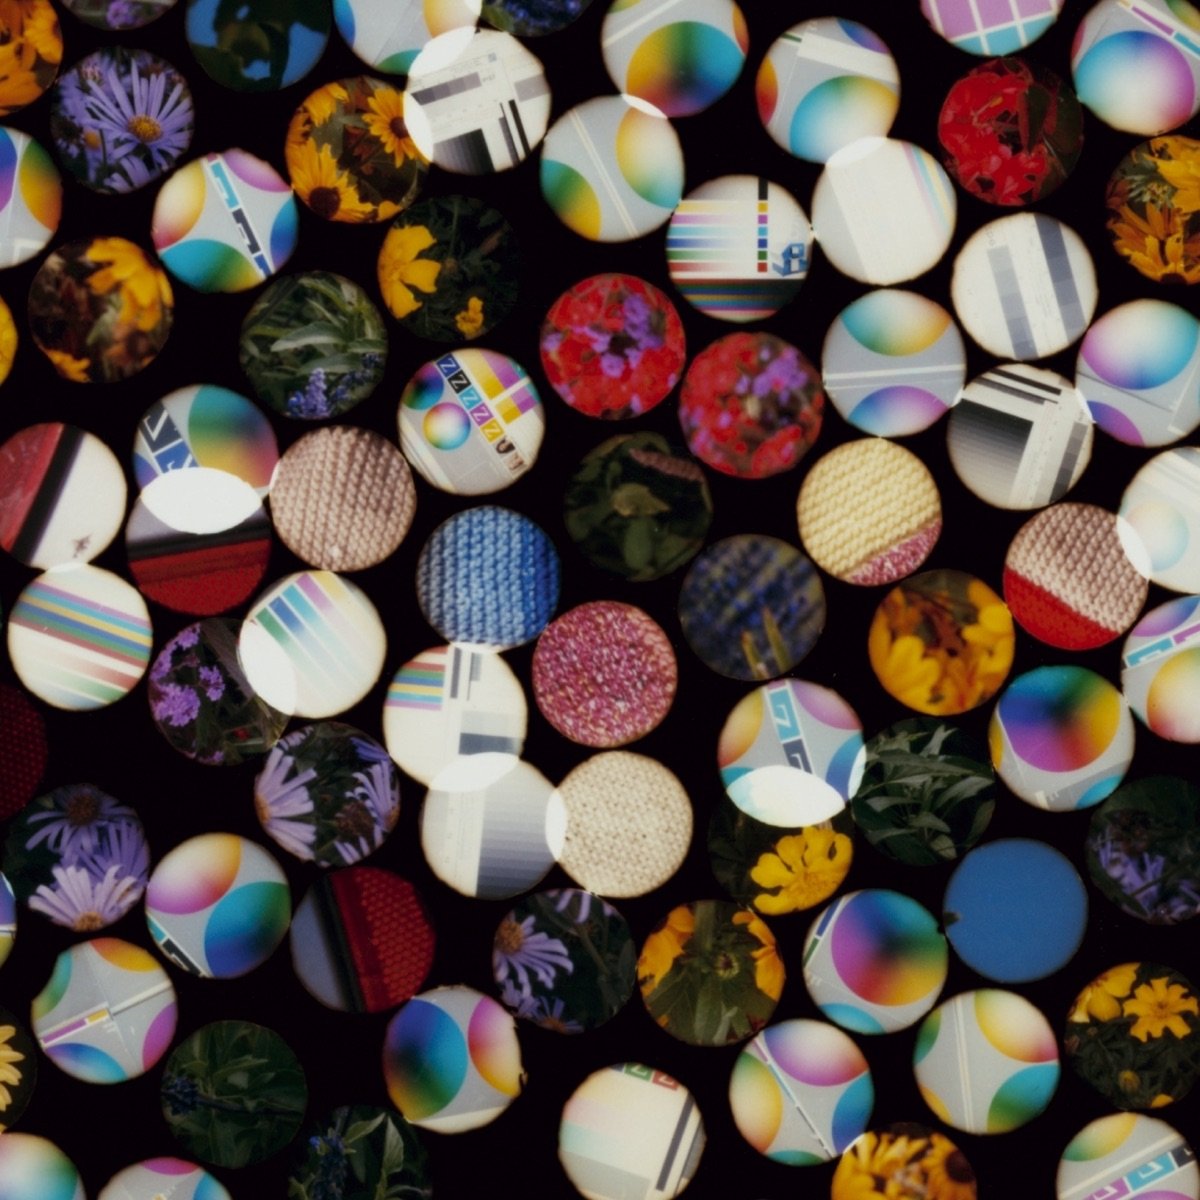 Four Tet - There Is Love in You (Expanded Edition) (2017) FLAC Download